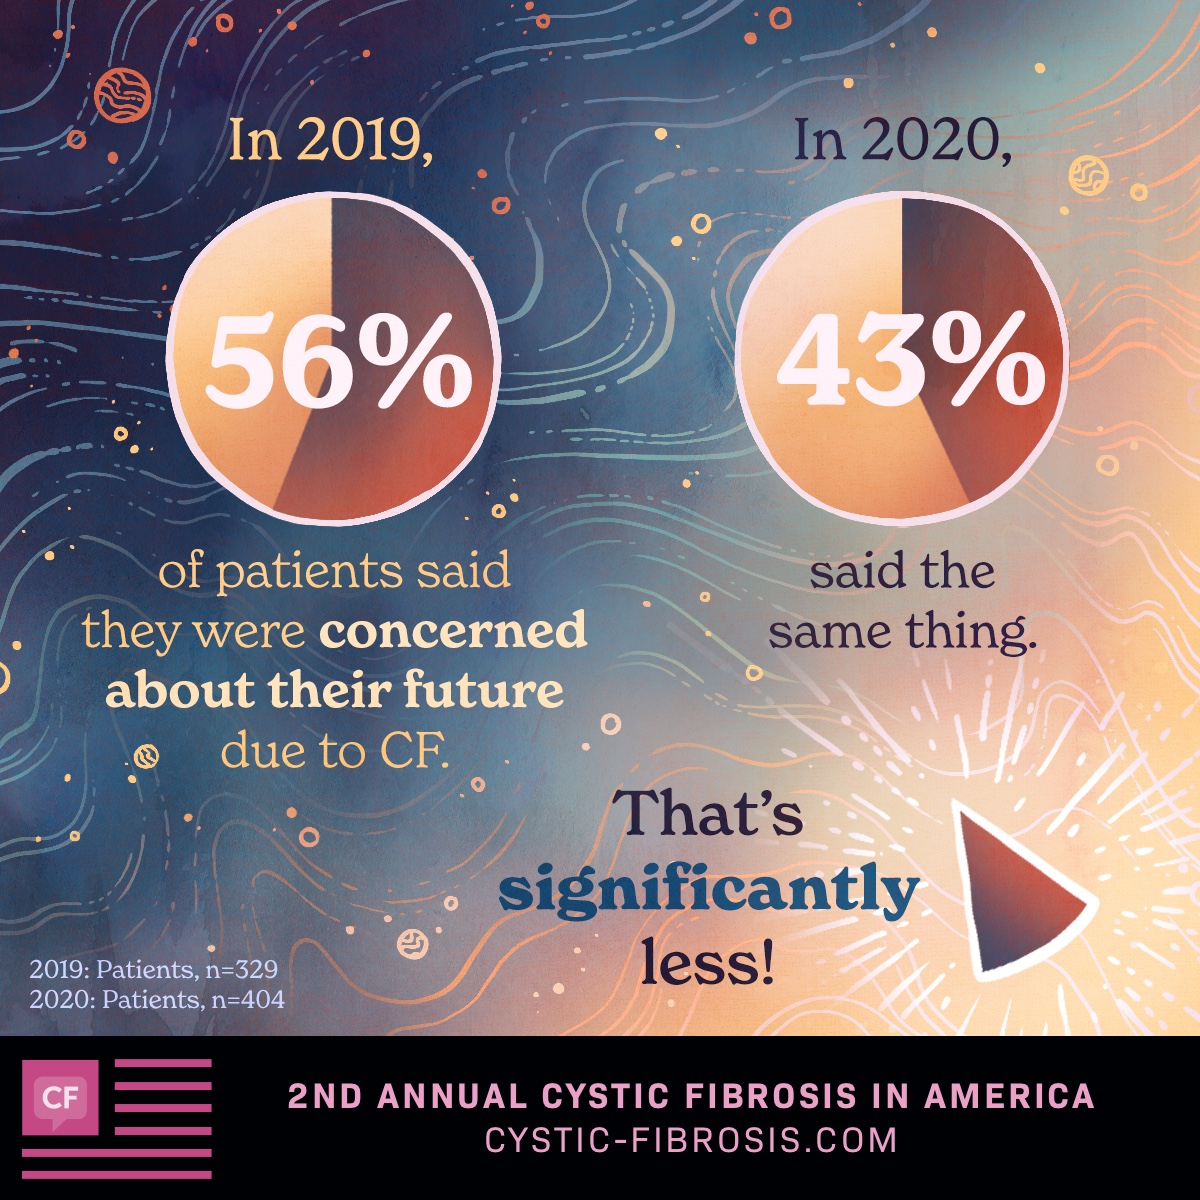 In 2019, 56% of patients said they were concerned about their future due to CF. In 2020, 43% said the same thing. That’s significantly less!